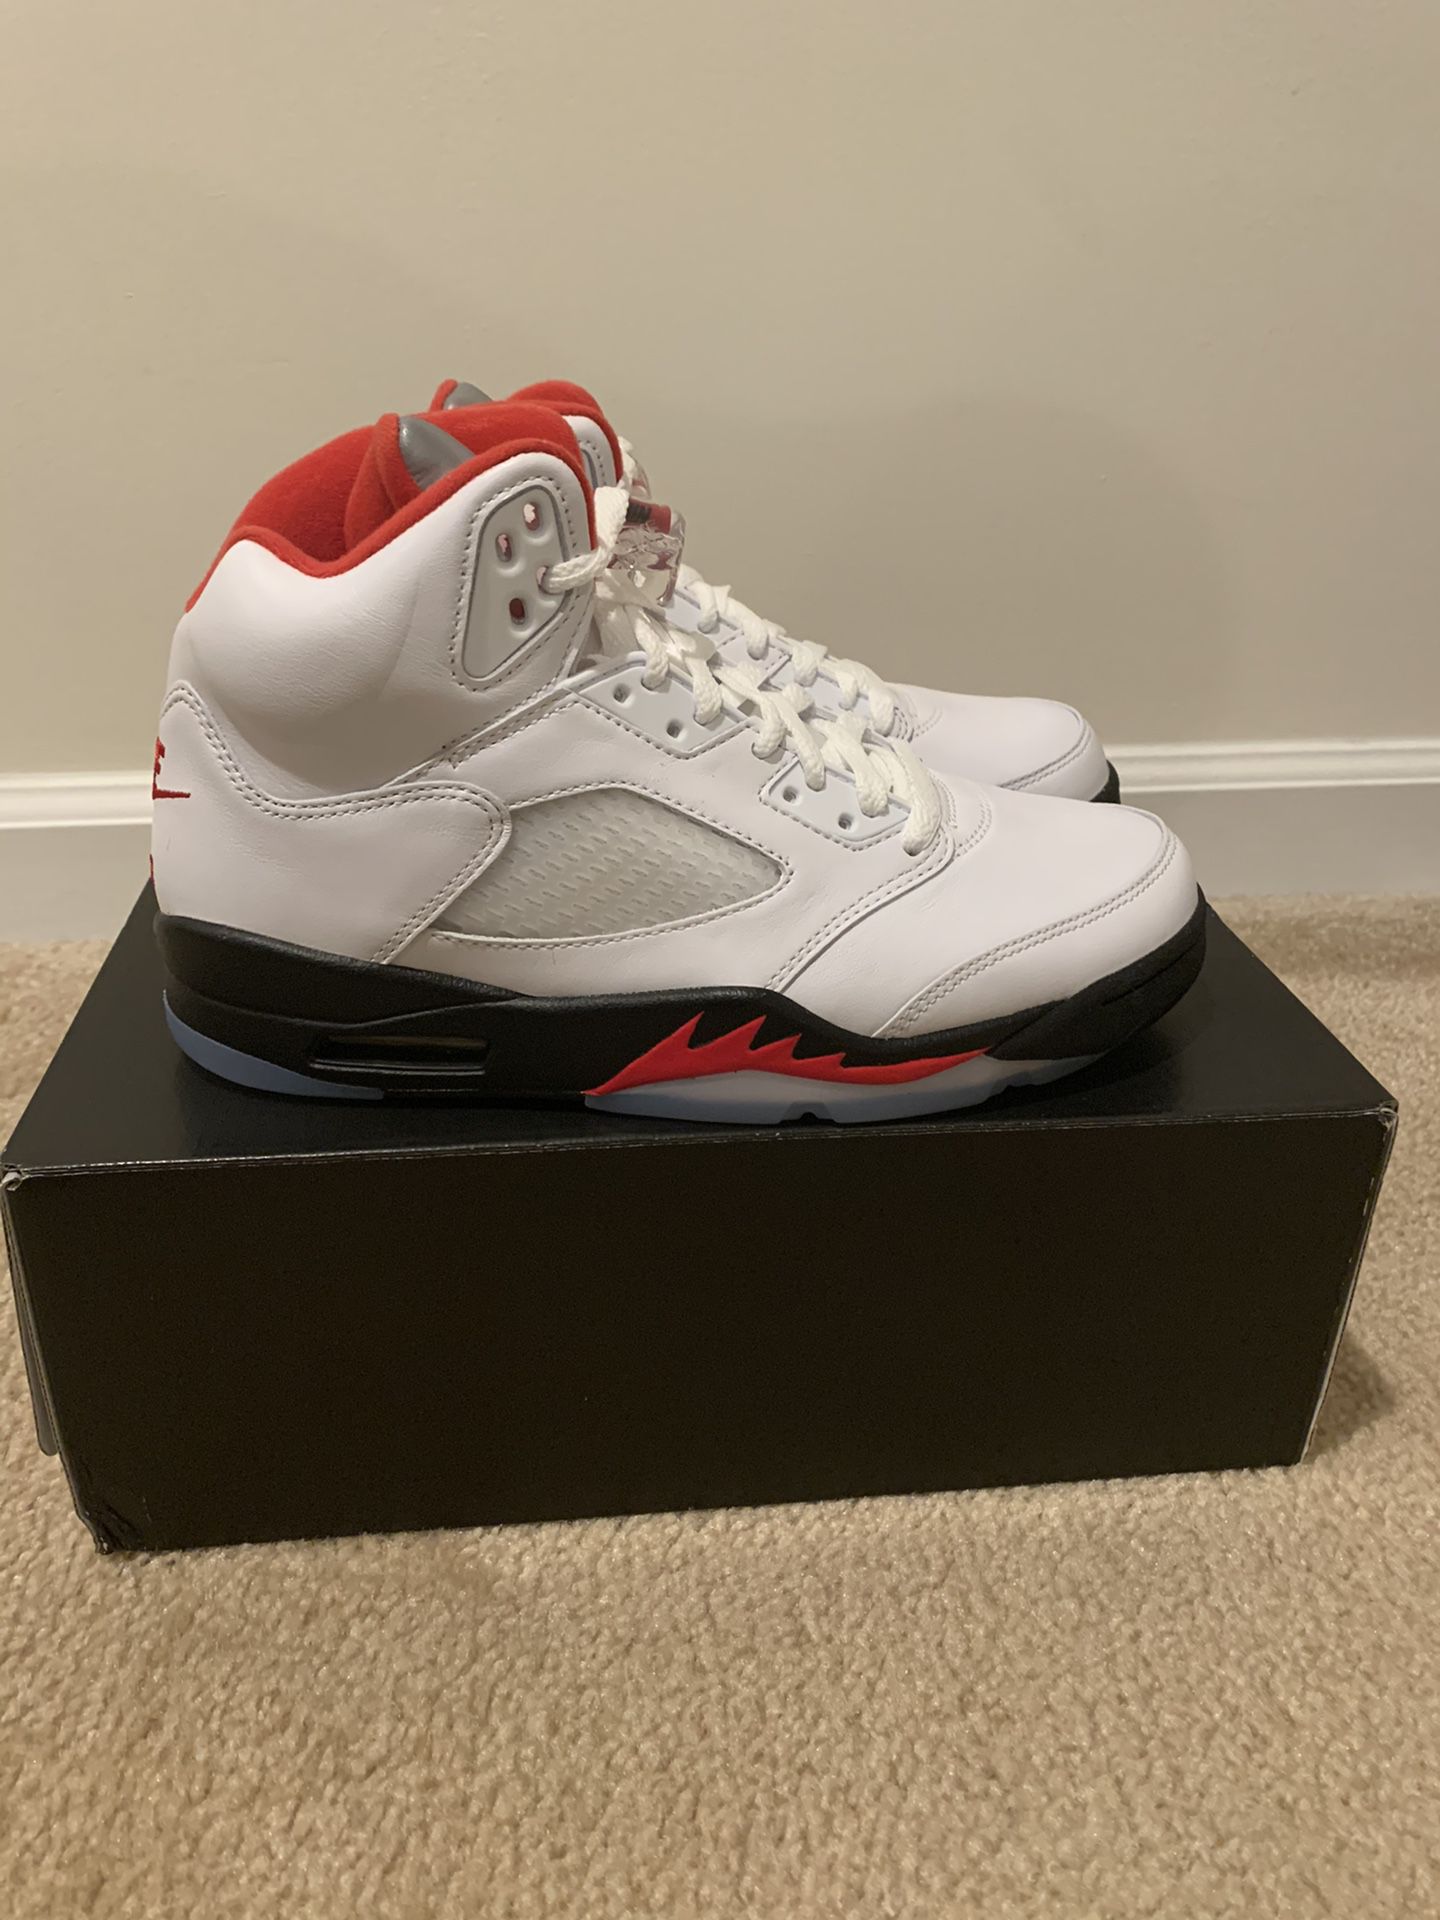 Jordan 5 Fire Red Silver Tongue Size 7.5